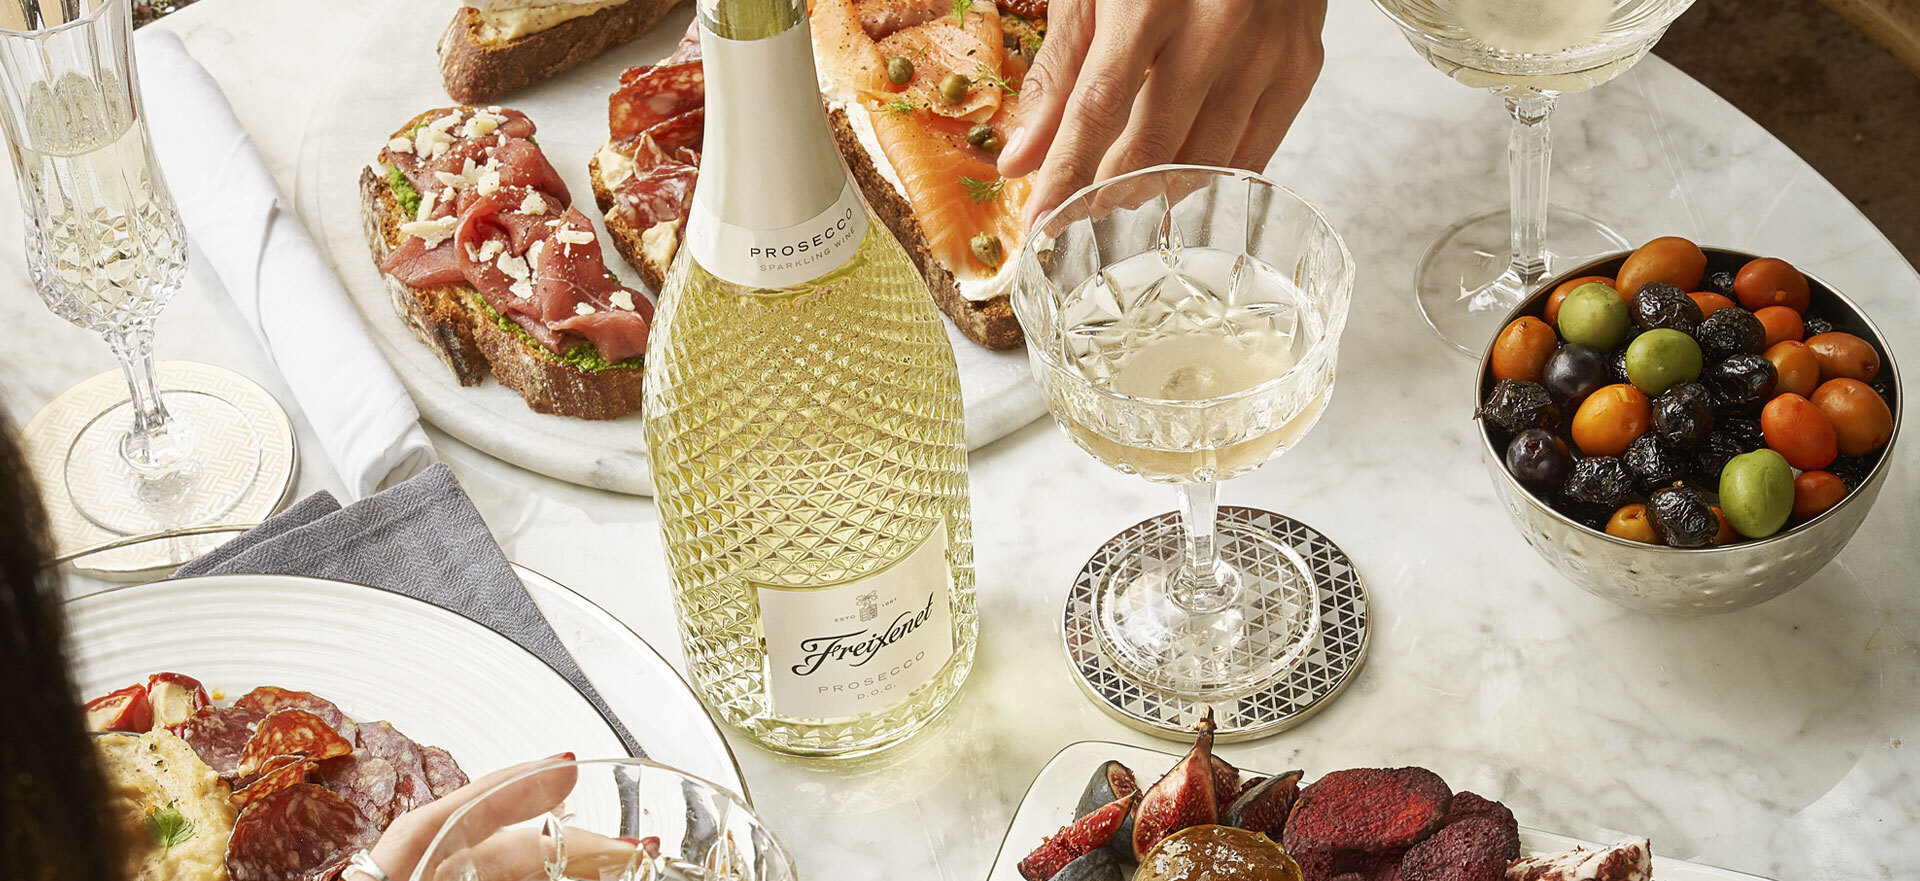 Two women's hands, charcuterie, a faceted sparkling wine bottle and filled coupe glasses.